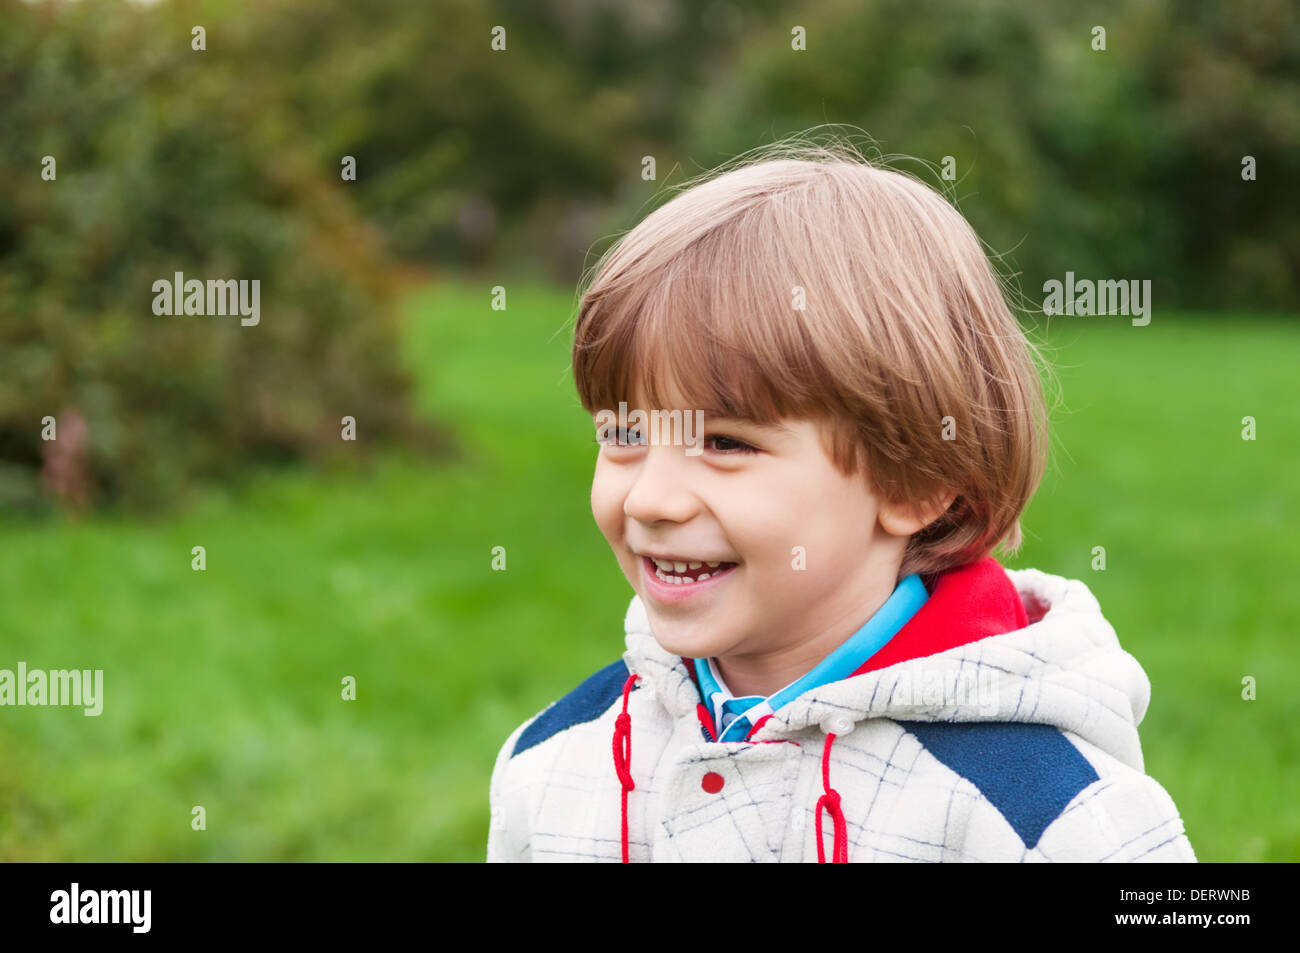 Adorable boy smiling outdoors Banque D'Images